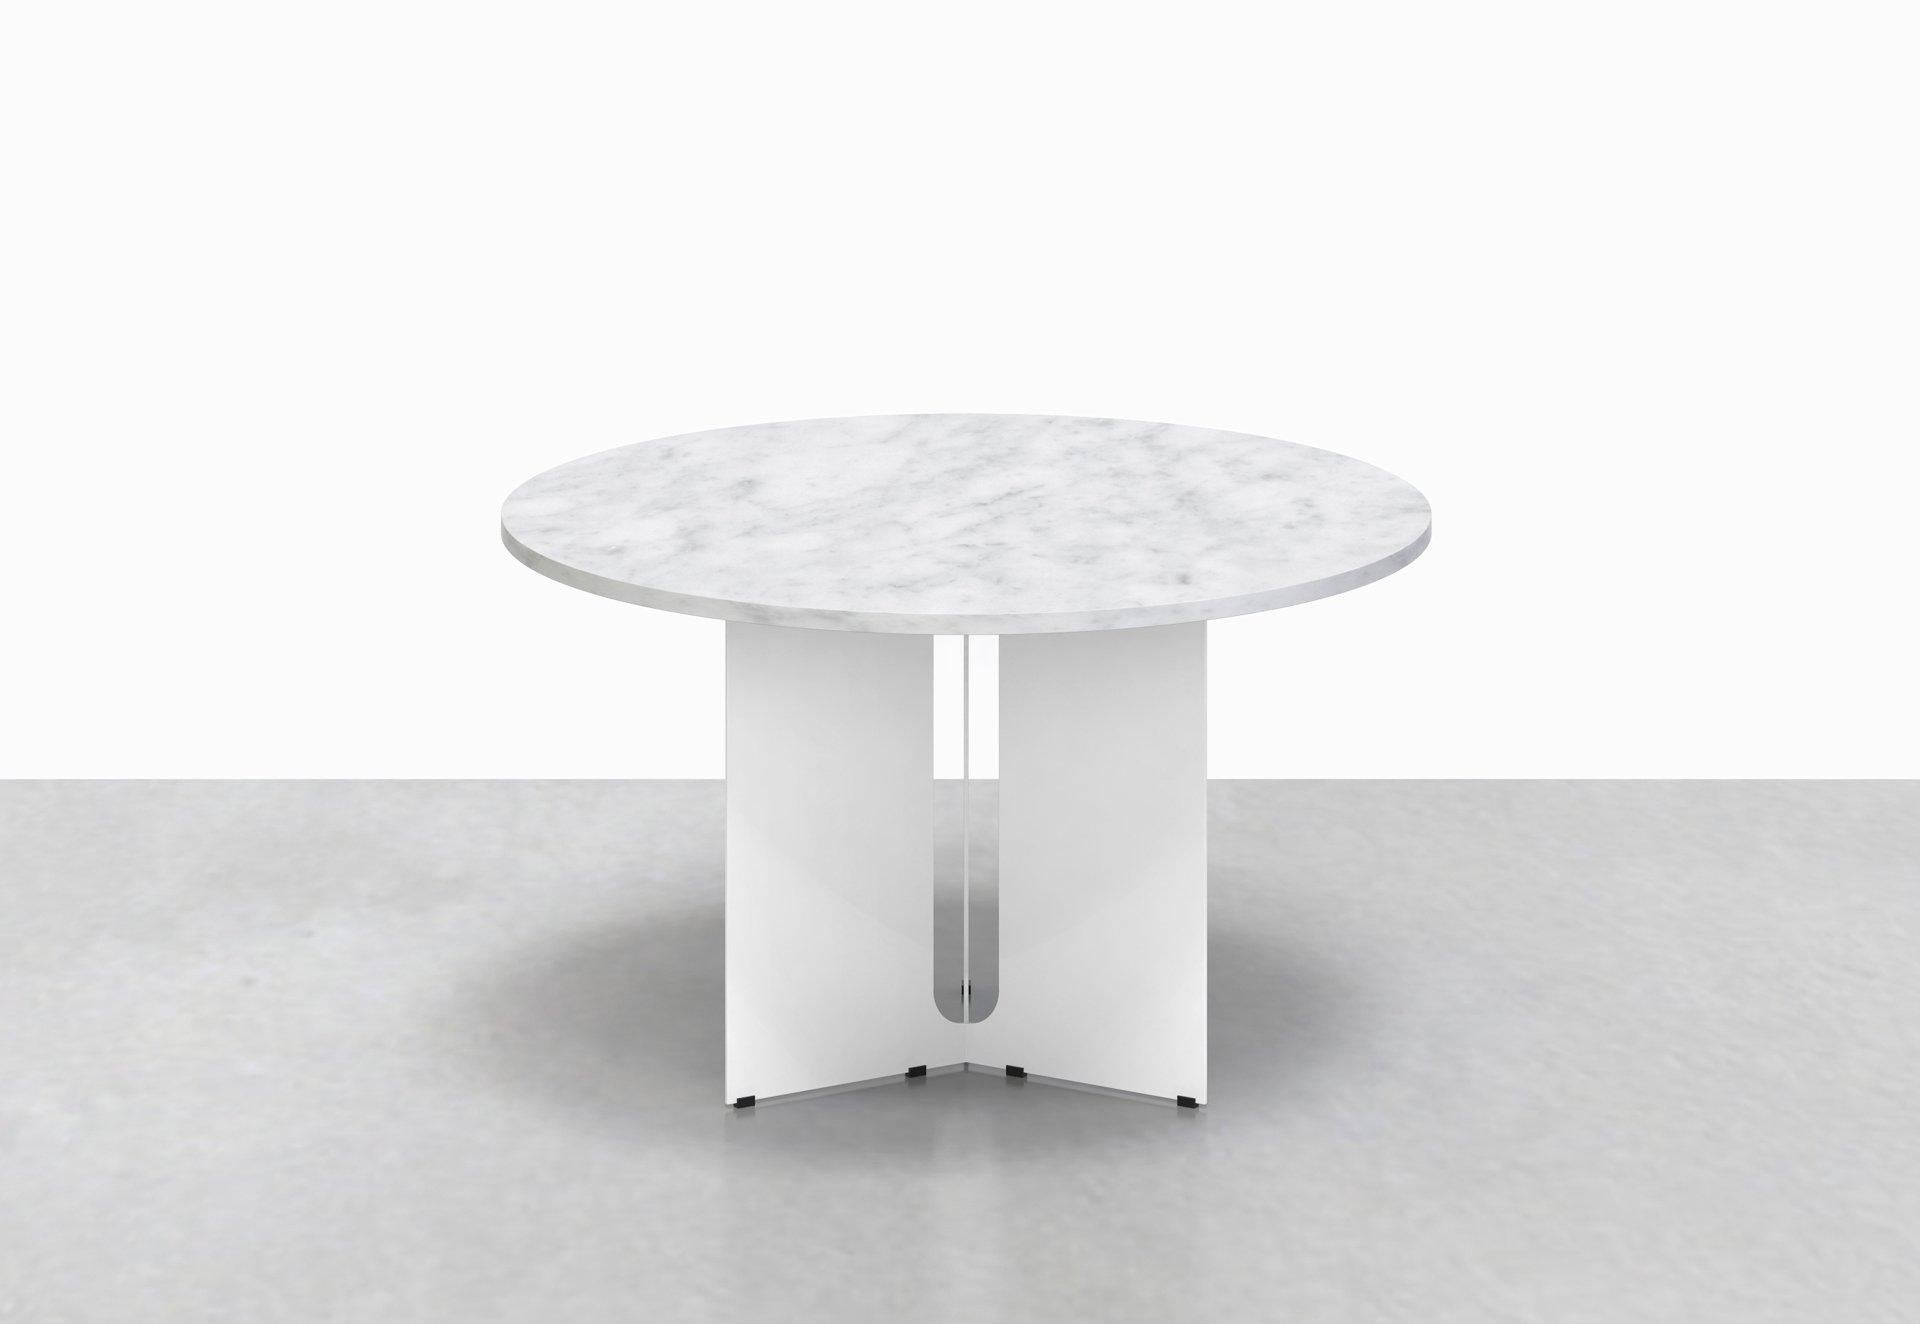 Our Trilo round table is polished but unpretentious. Choose between a solid walnut or variegated white marble top, anchored by a steel base with a playful geometrical cut-out detail.